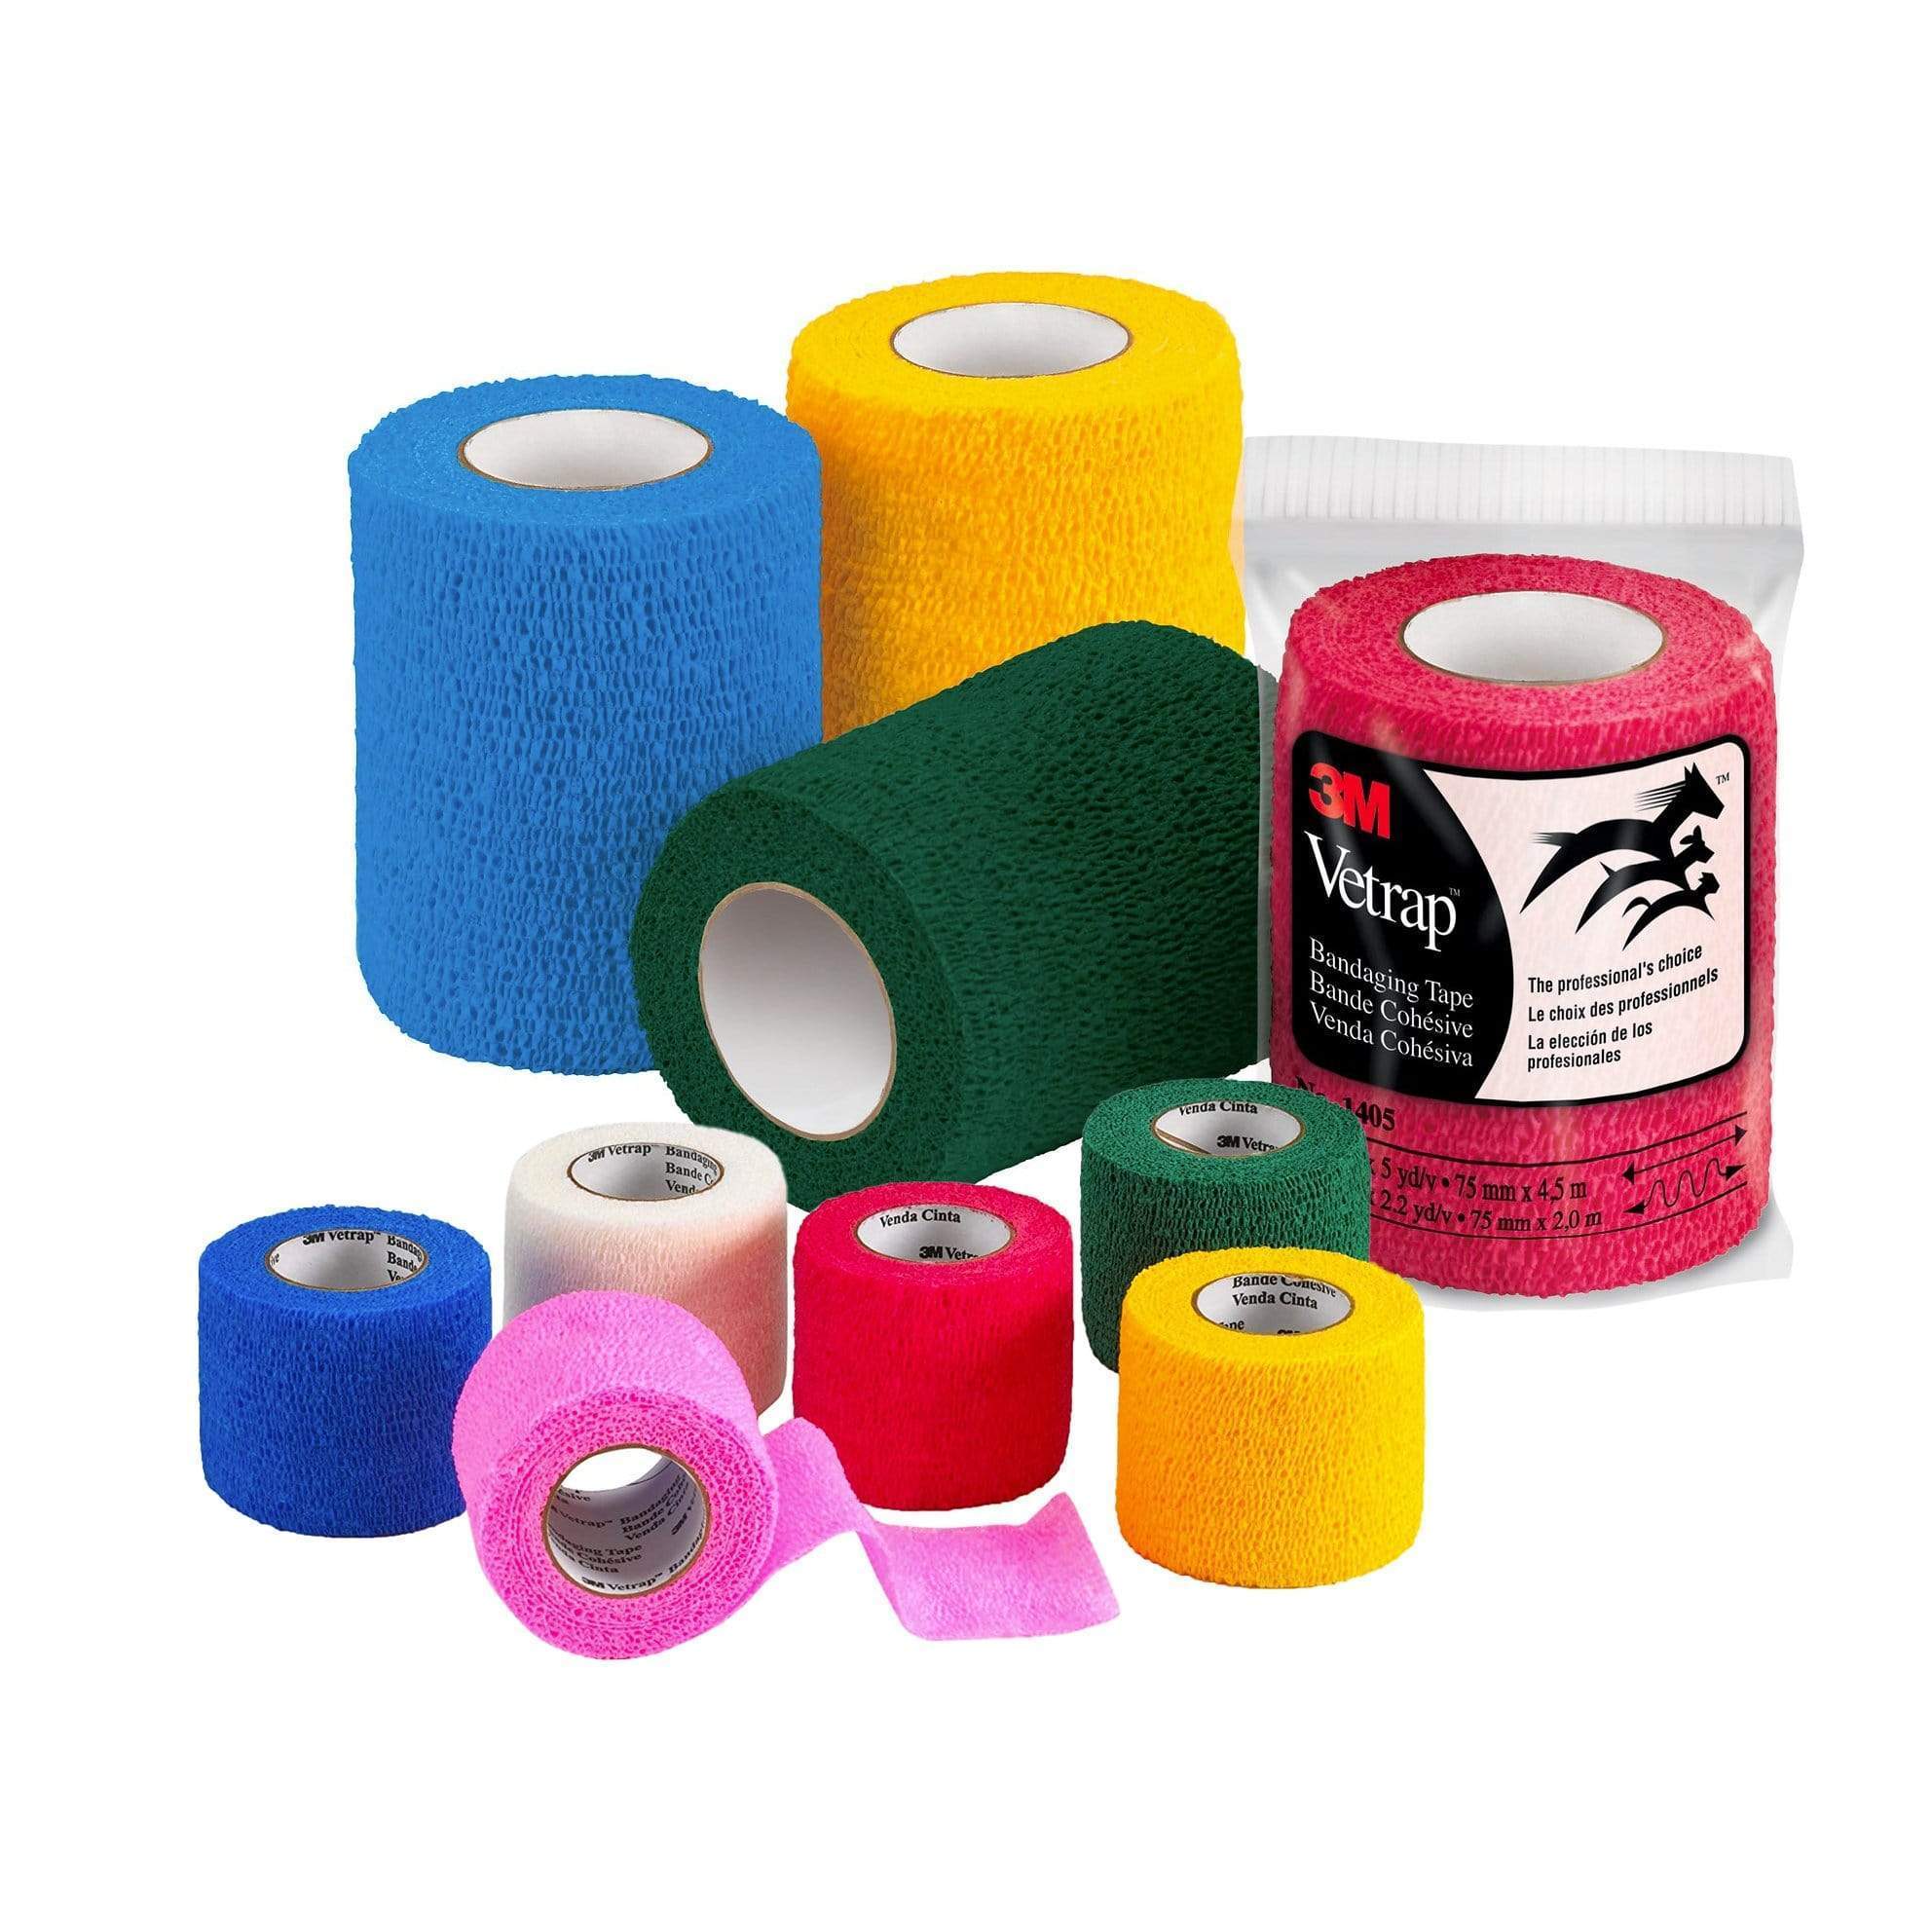 3M Vetrap Bandaging Tape with Hand Tear Technology